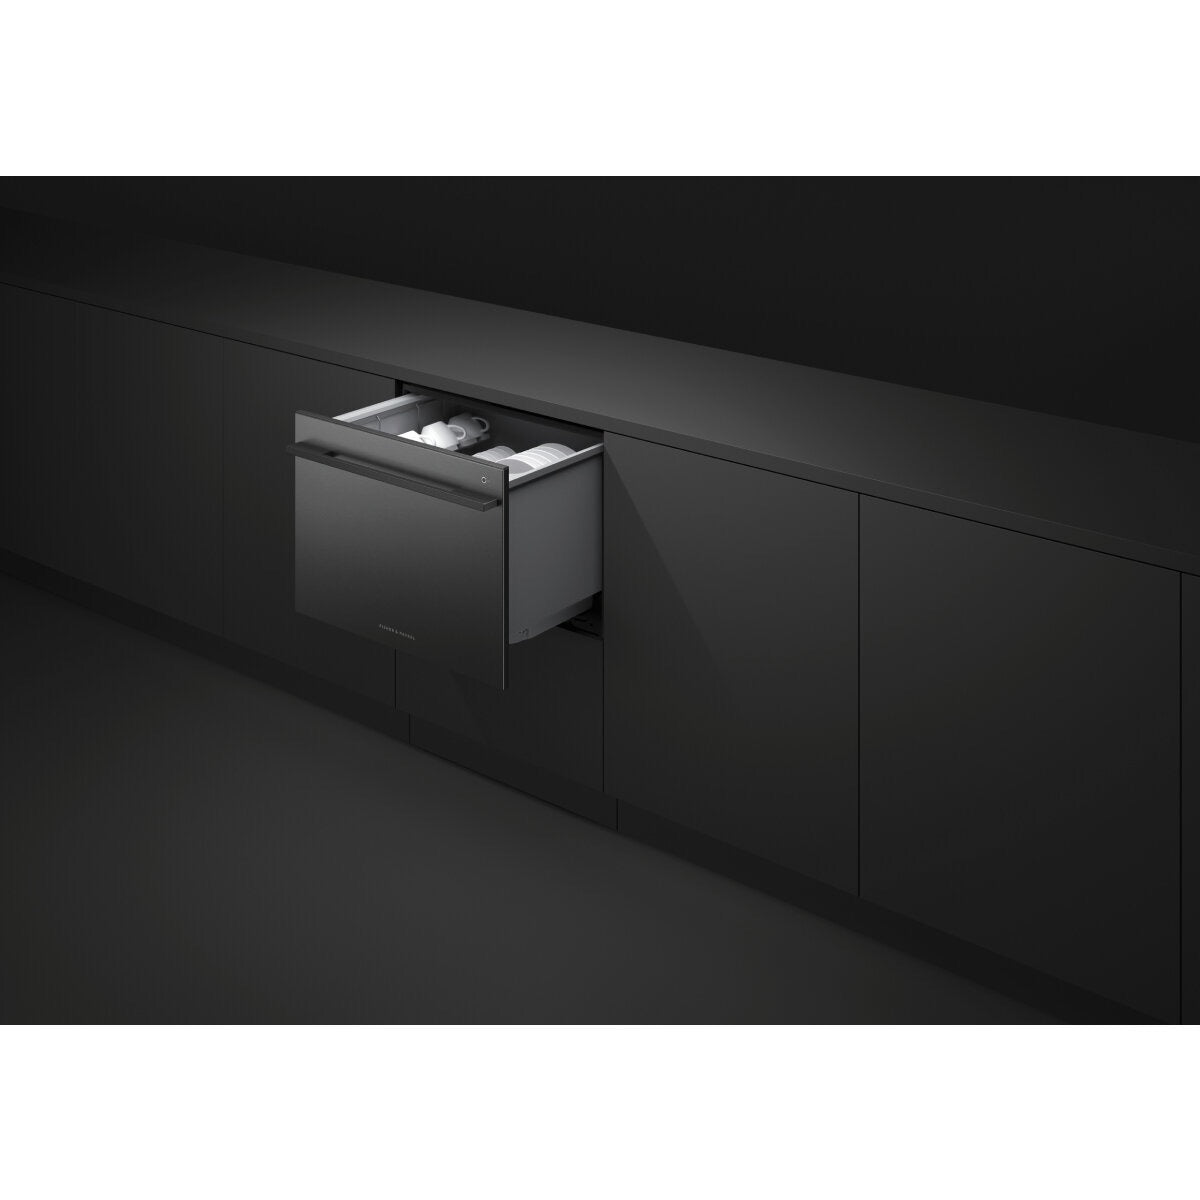 Factory second Fisher & Paykel Tall Single DishDrawer Dishwasher Black Stainless Steel DD60SDFTB9 - Second Hand Appliances Geebung